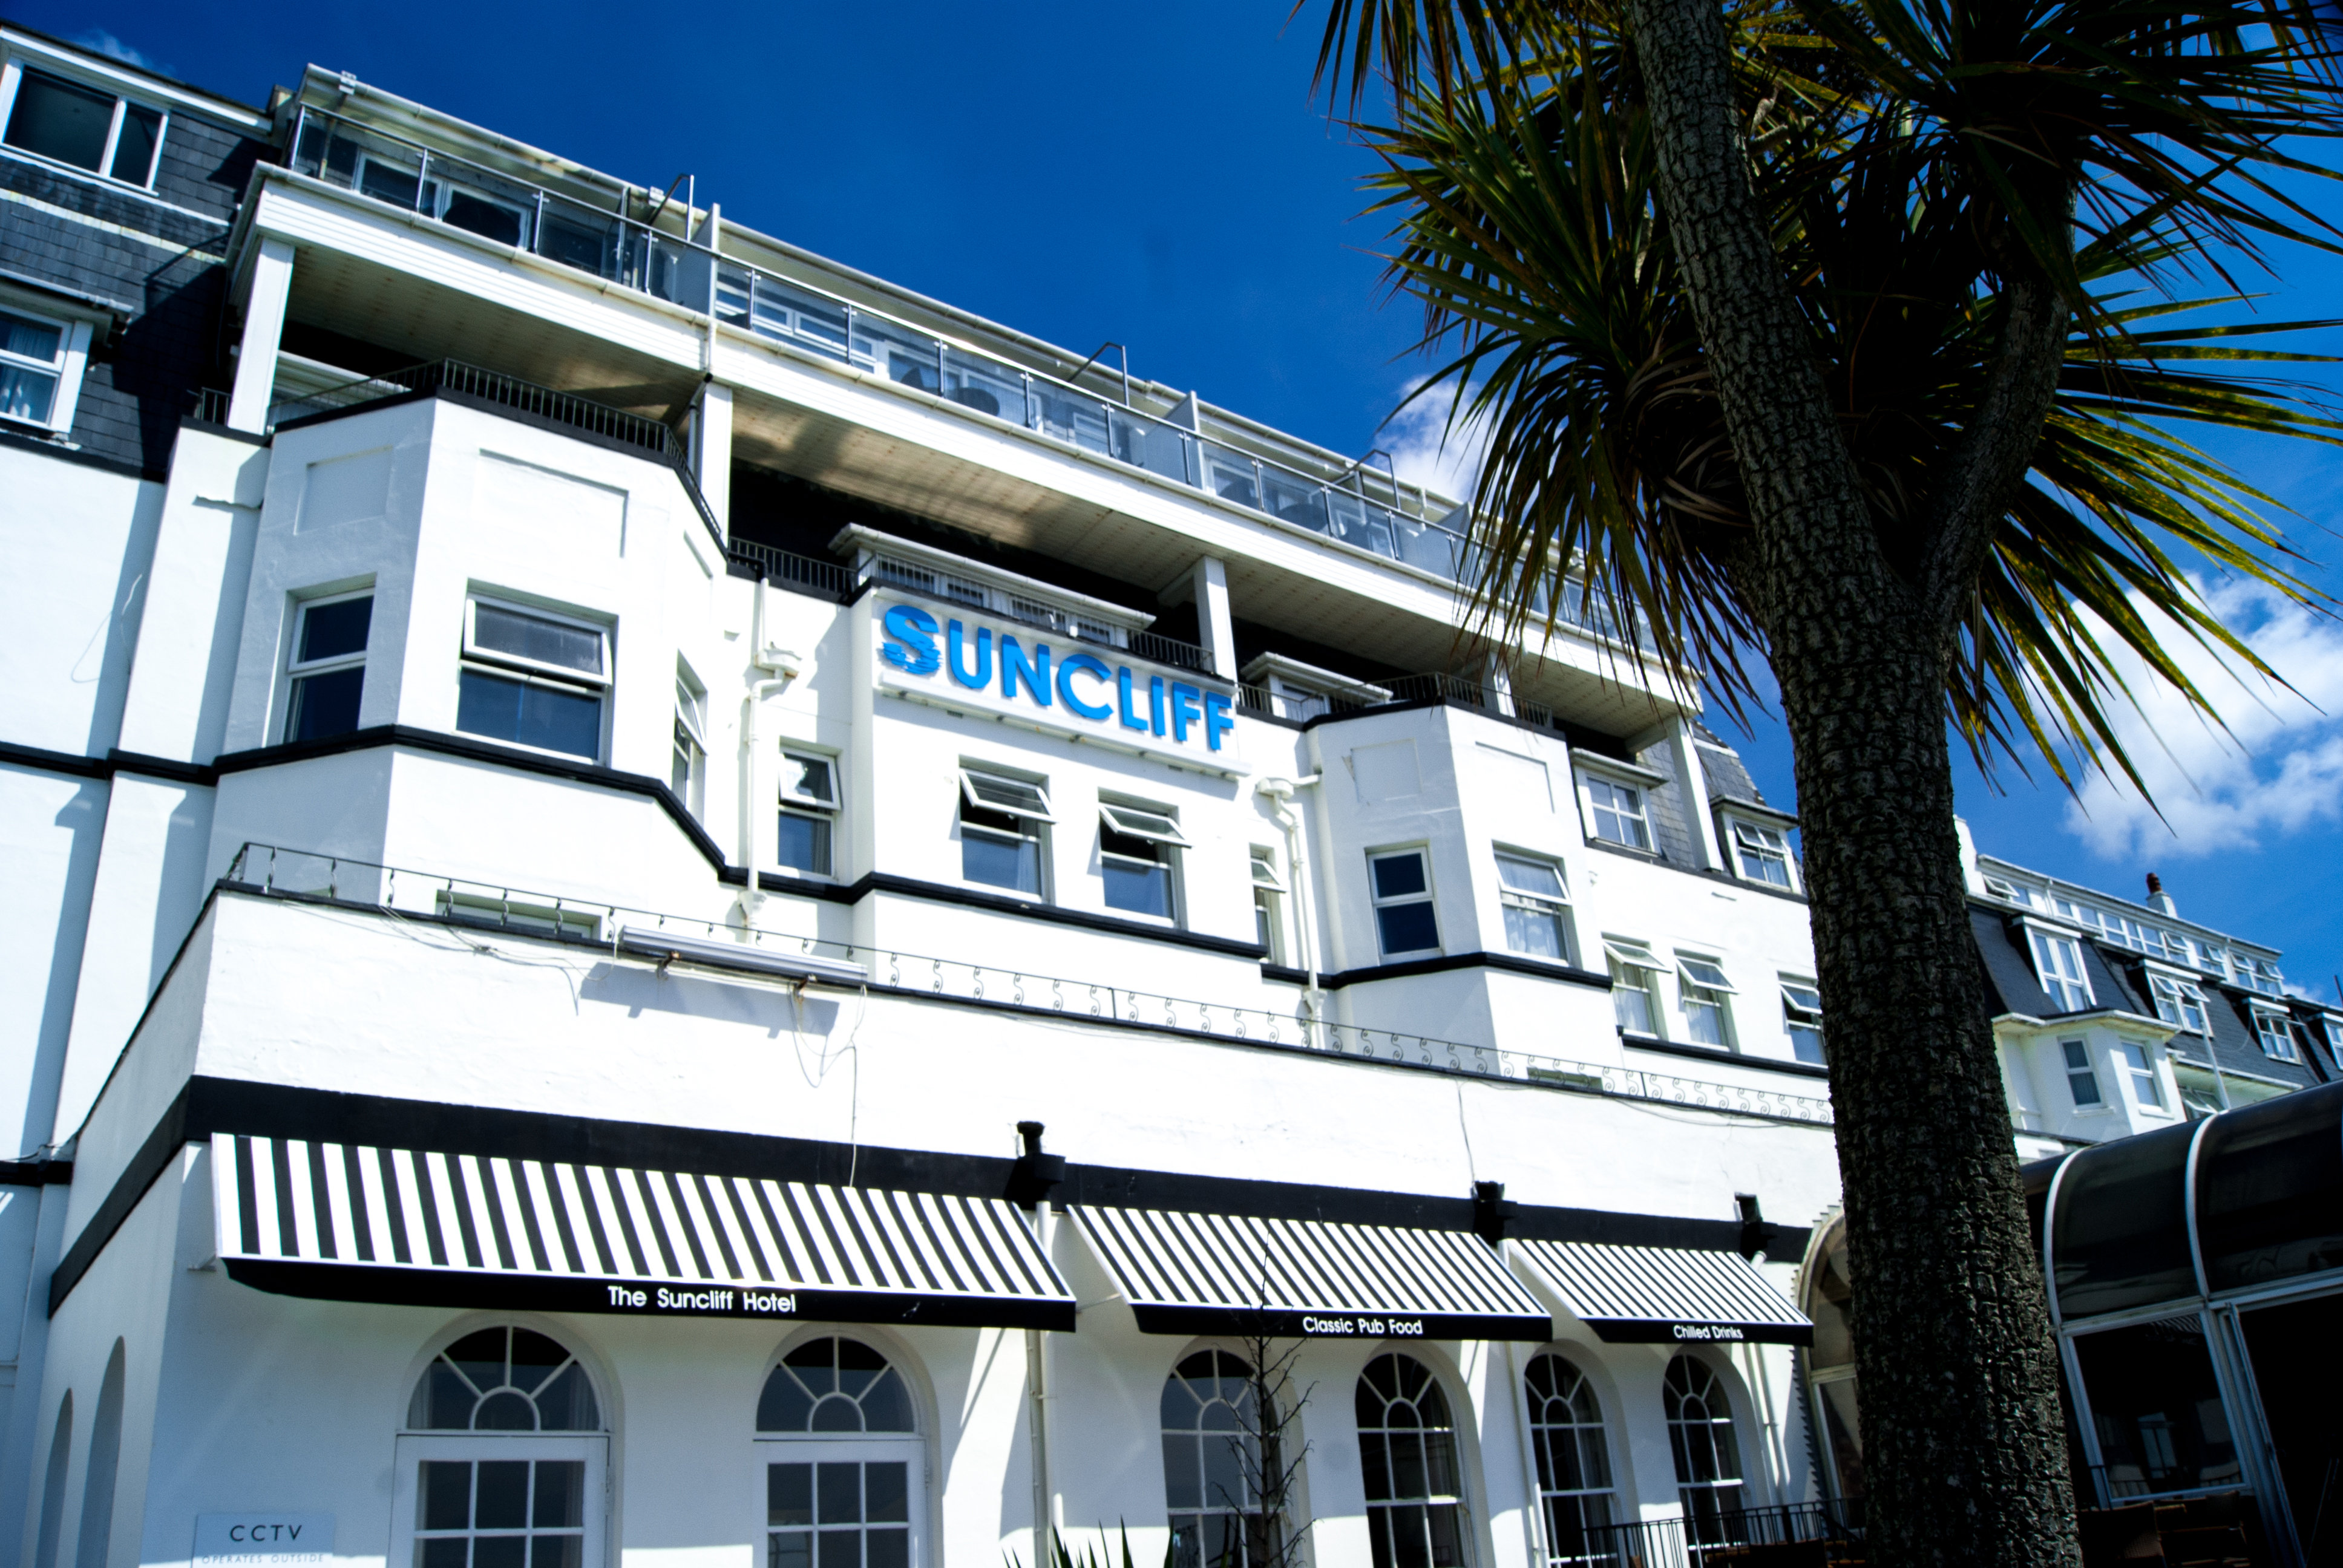 The Suncliff Hotel Bournemouth image